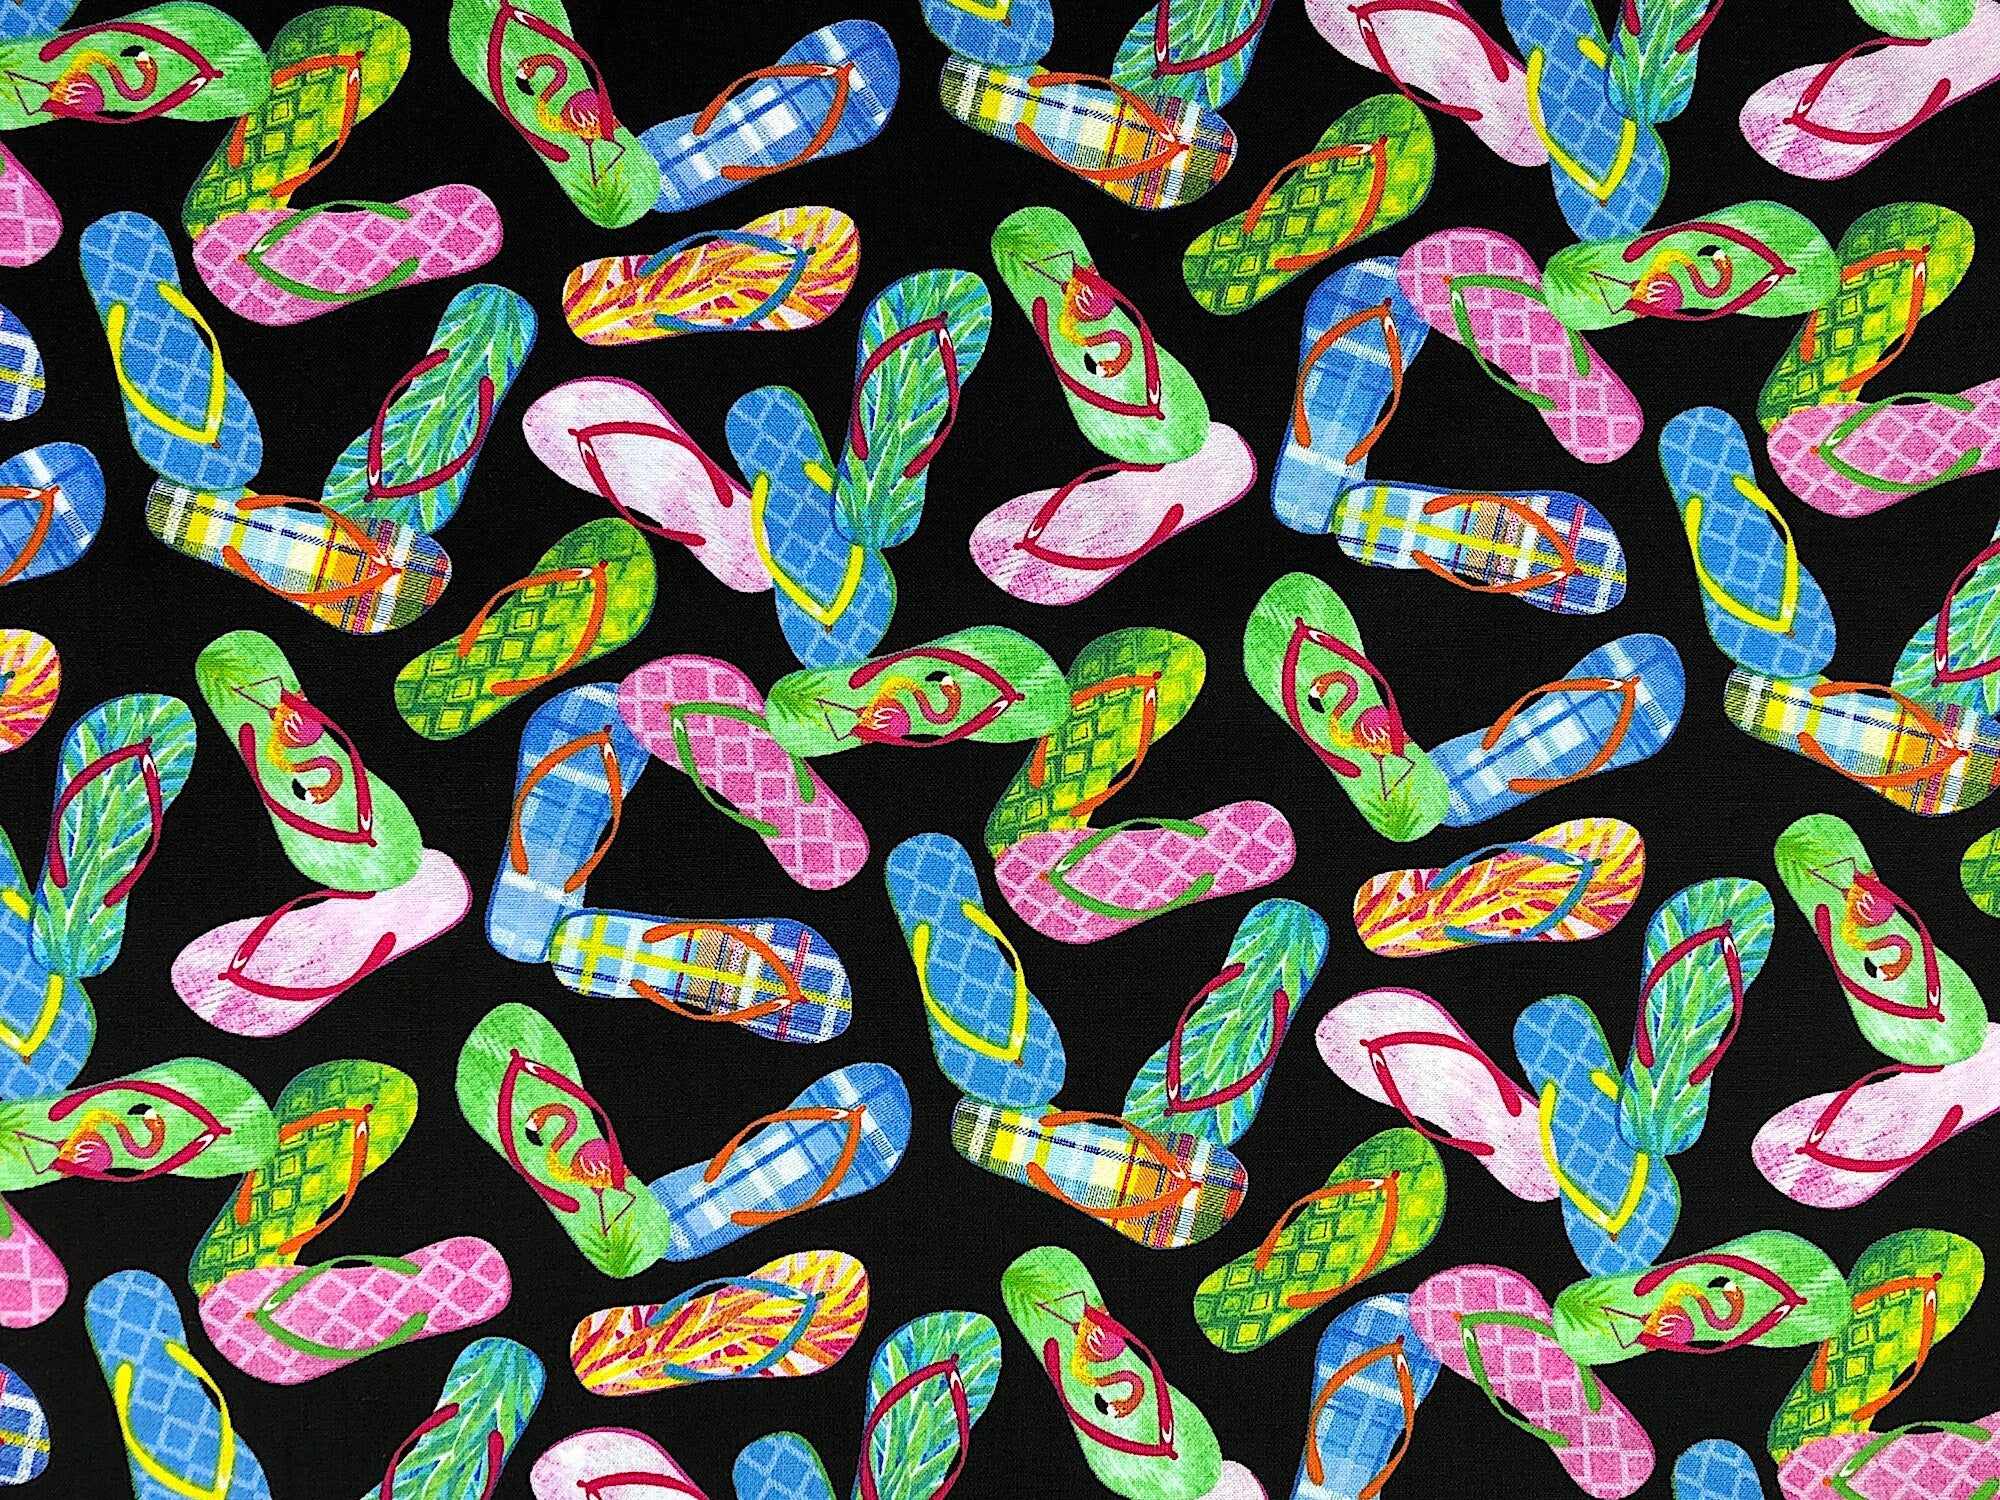 This black fabric is covered with flip flops of multiple colors. The flip flops are placed randomly throughout the pattern